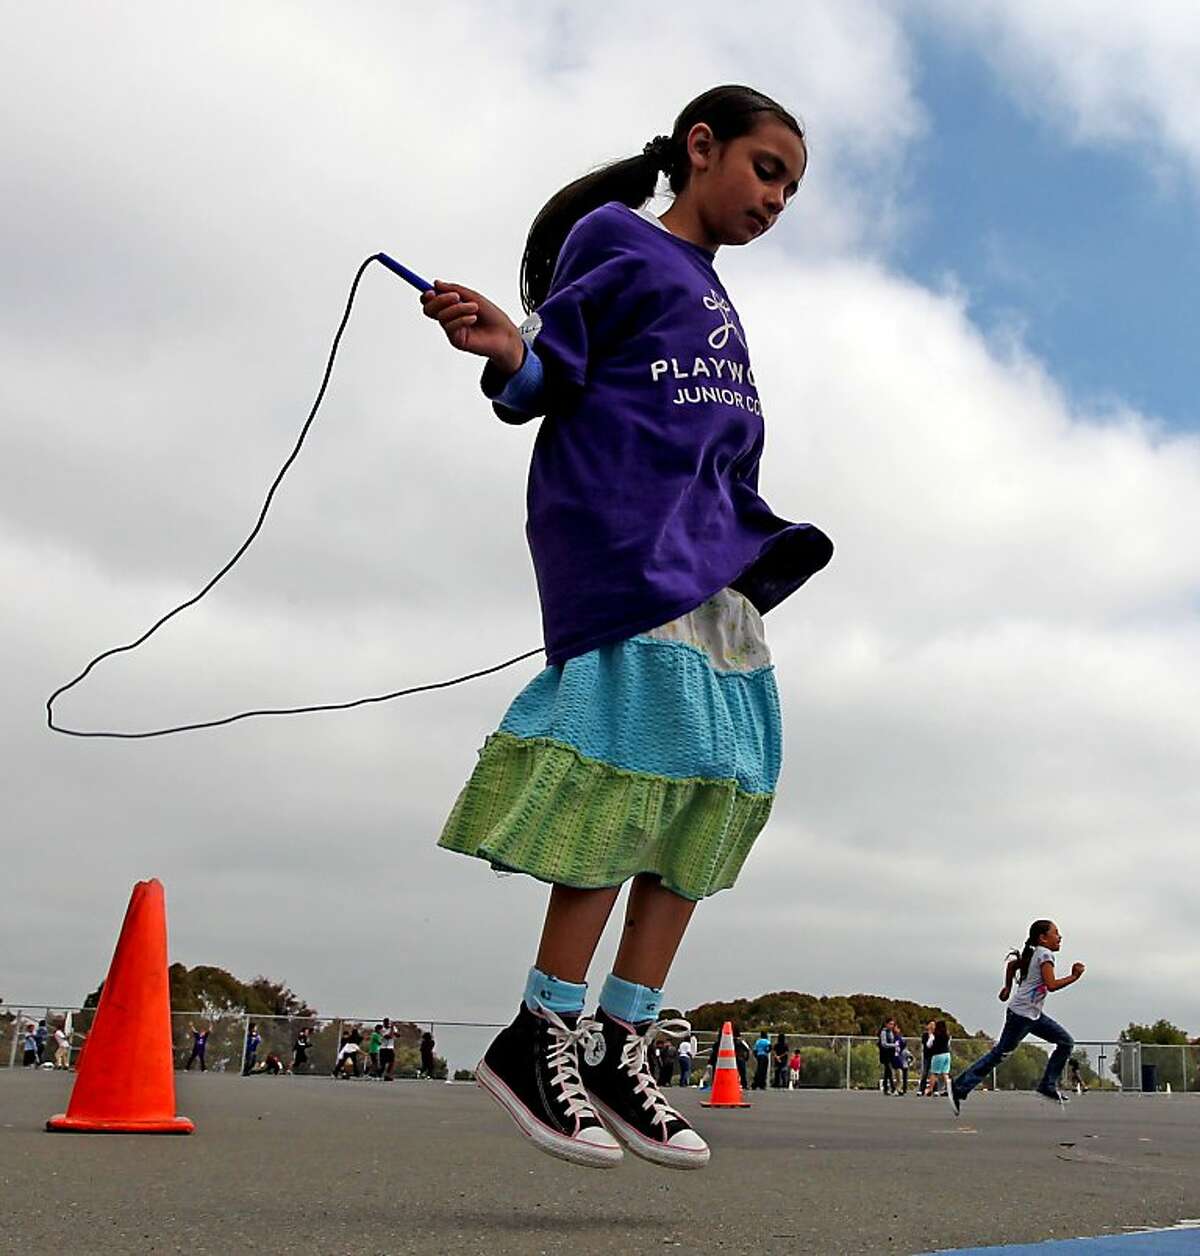 Ana Villareal 9 a Montalvin Elementary School student takes part in recess sponsored by PlayWorks, a nonprofit that promotes exercise at a number of Bay-Area schools Wednesday, June 5, 2013 in San Pablo Calif. At a time when recess and other play time is under pressure to make more time for test preparation and basic academics, a nonprofit is working hard to explain how schools can make recess count. PlayWorks works in a number of Bay Area schools to coach kids to improve the school-learning environment by explaining why play matters. The results are a decrease in bullying and aggressive actions and an uptick in academic performance.